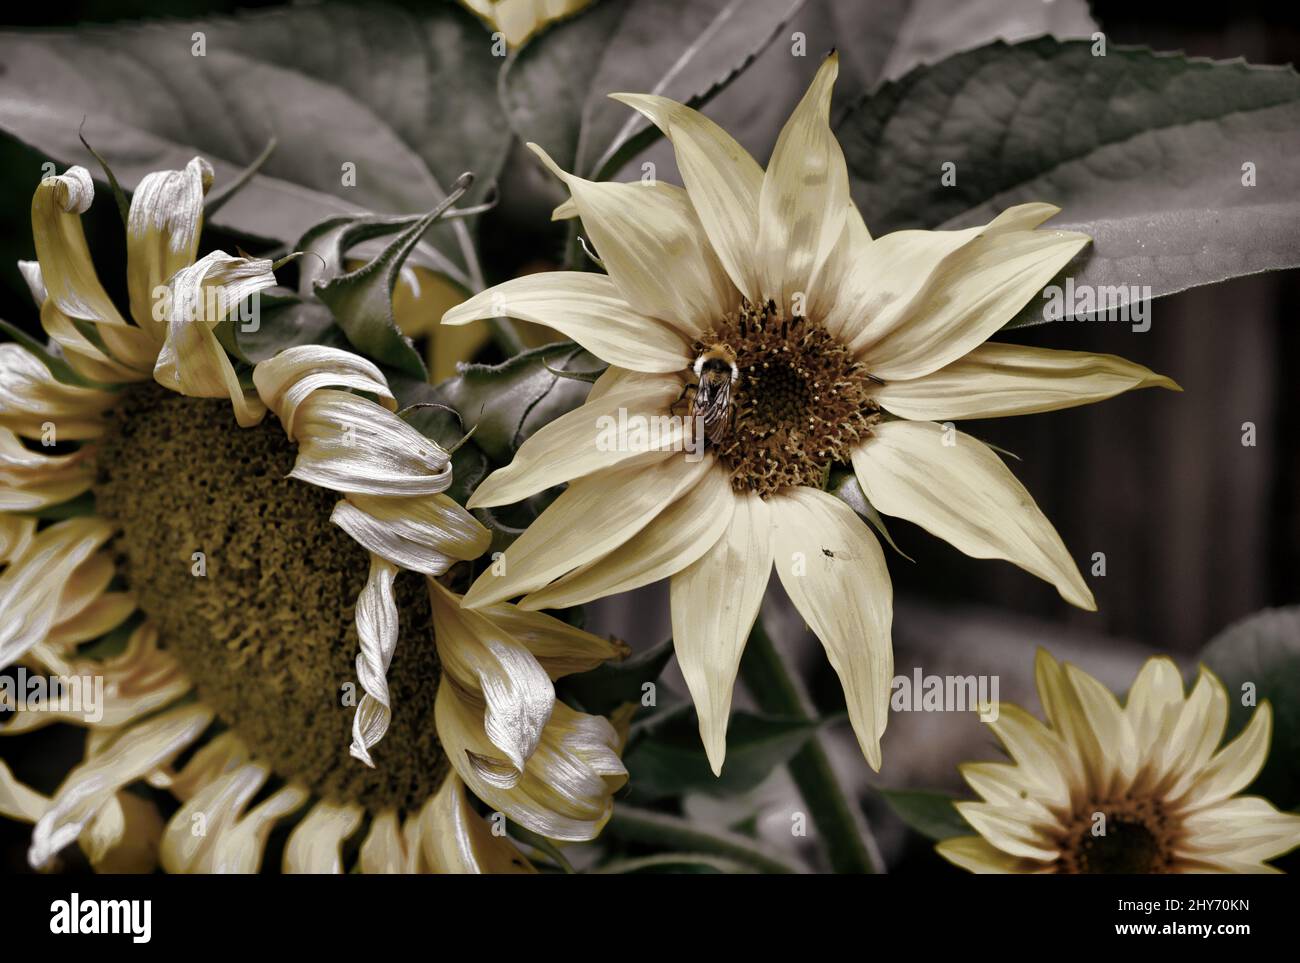 A grouping of sunflowers with a bumblebee on one of the flowers. Stock Photo